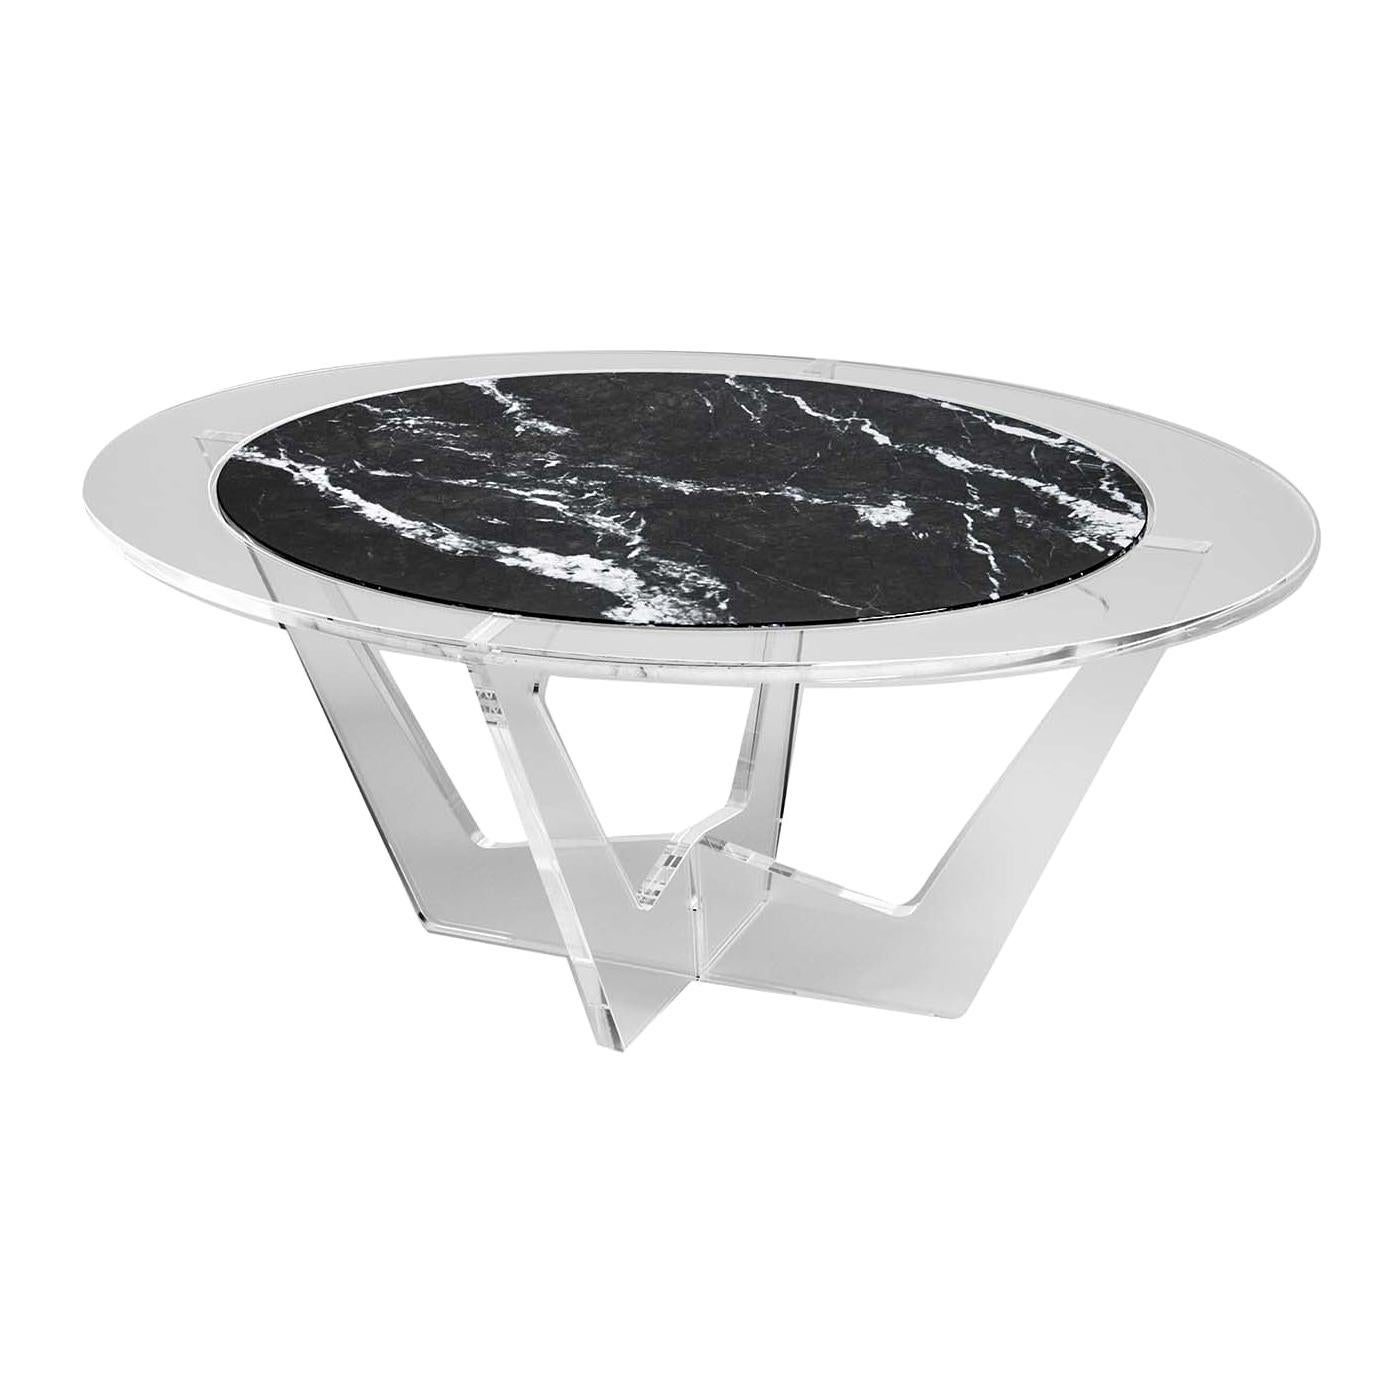 Hac Oval Coffee Table with Gray Carnico Marble Top by Madea Milano